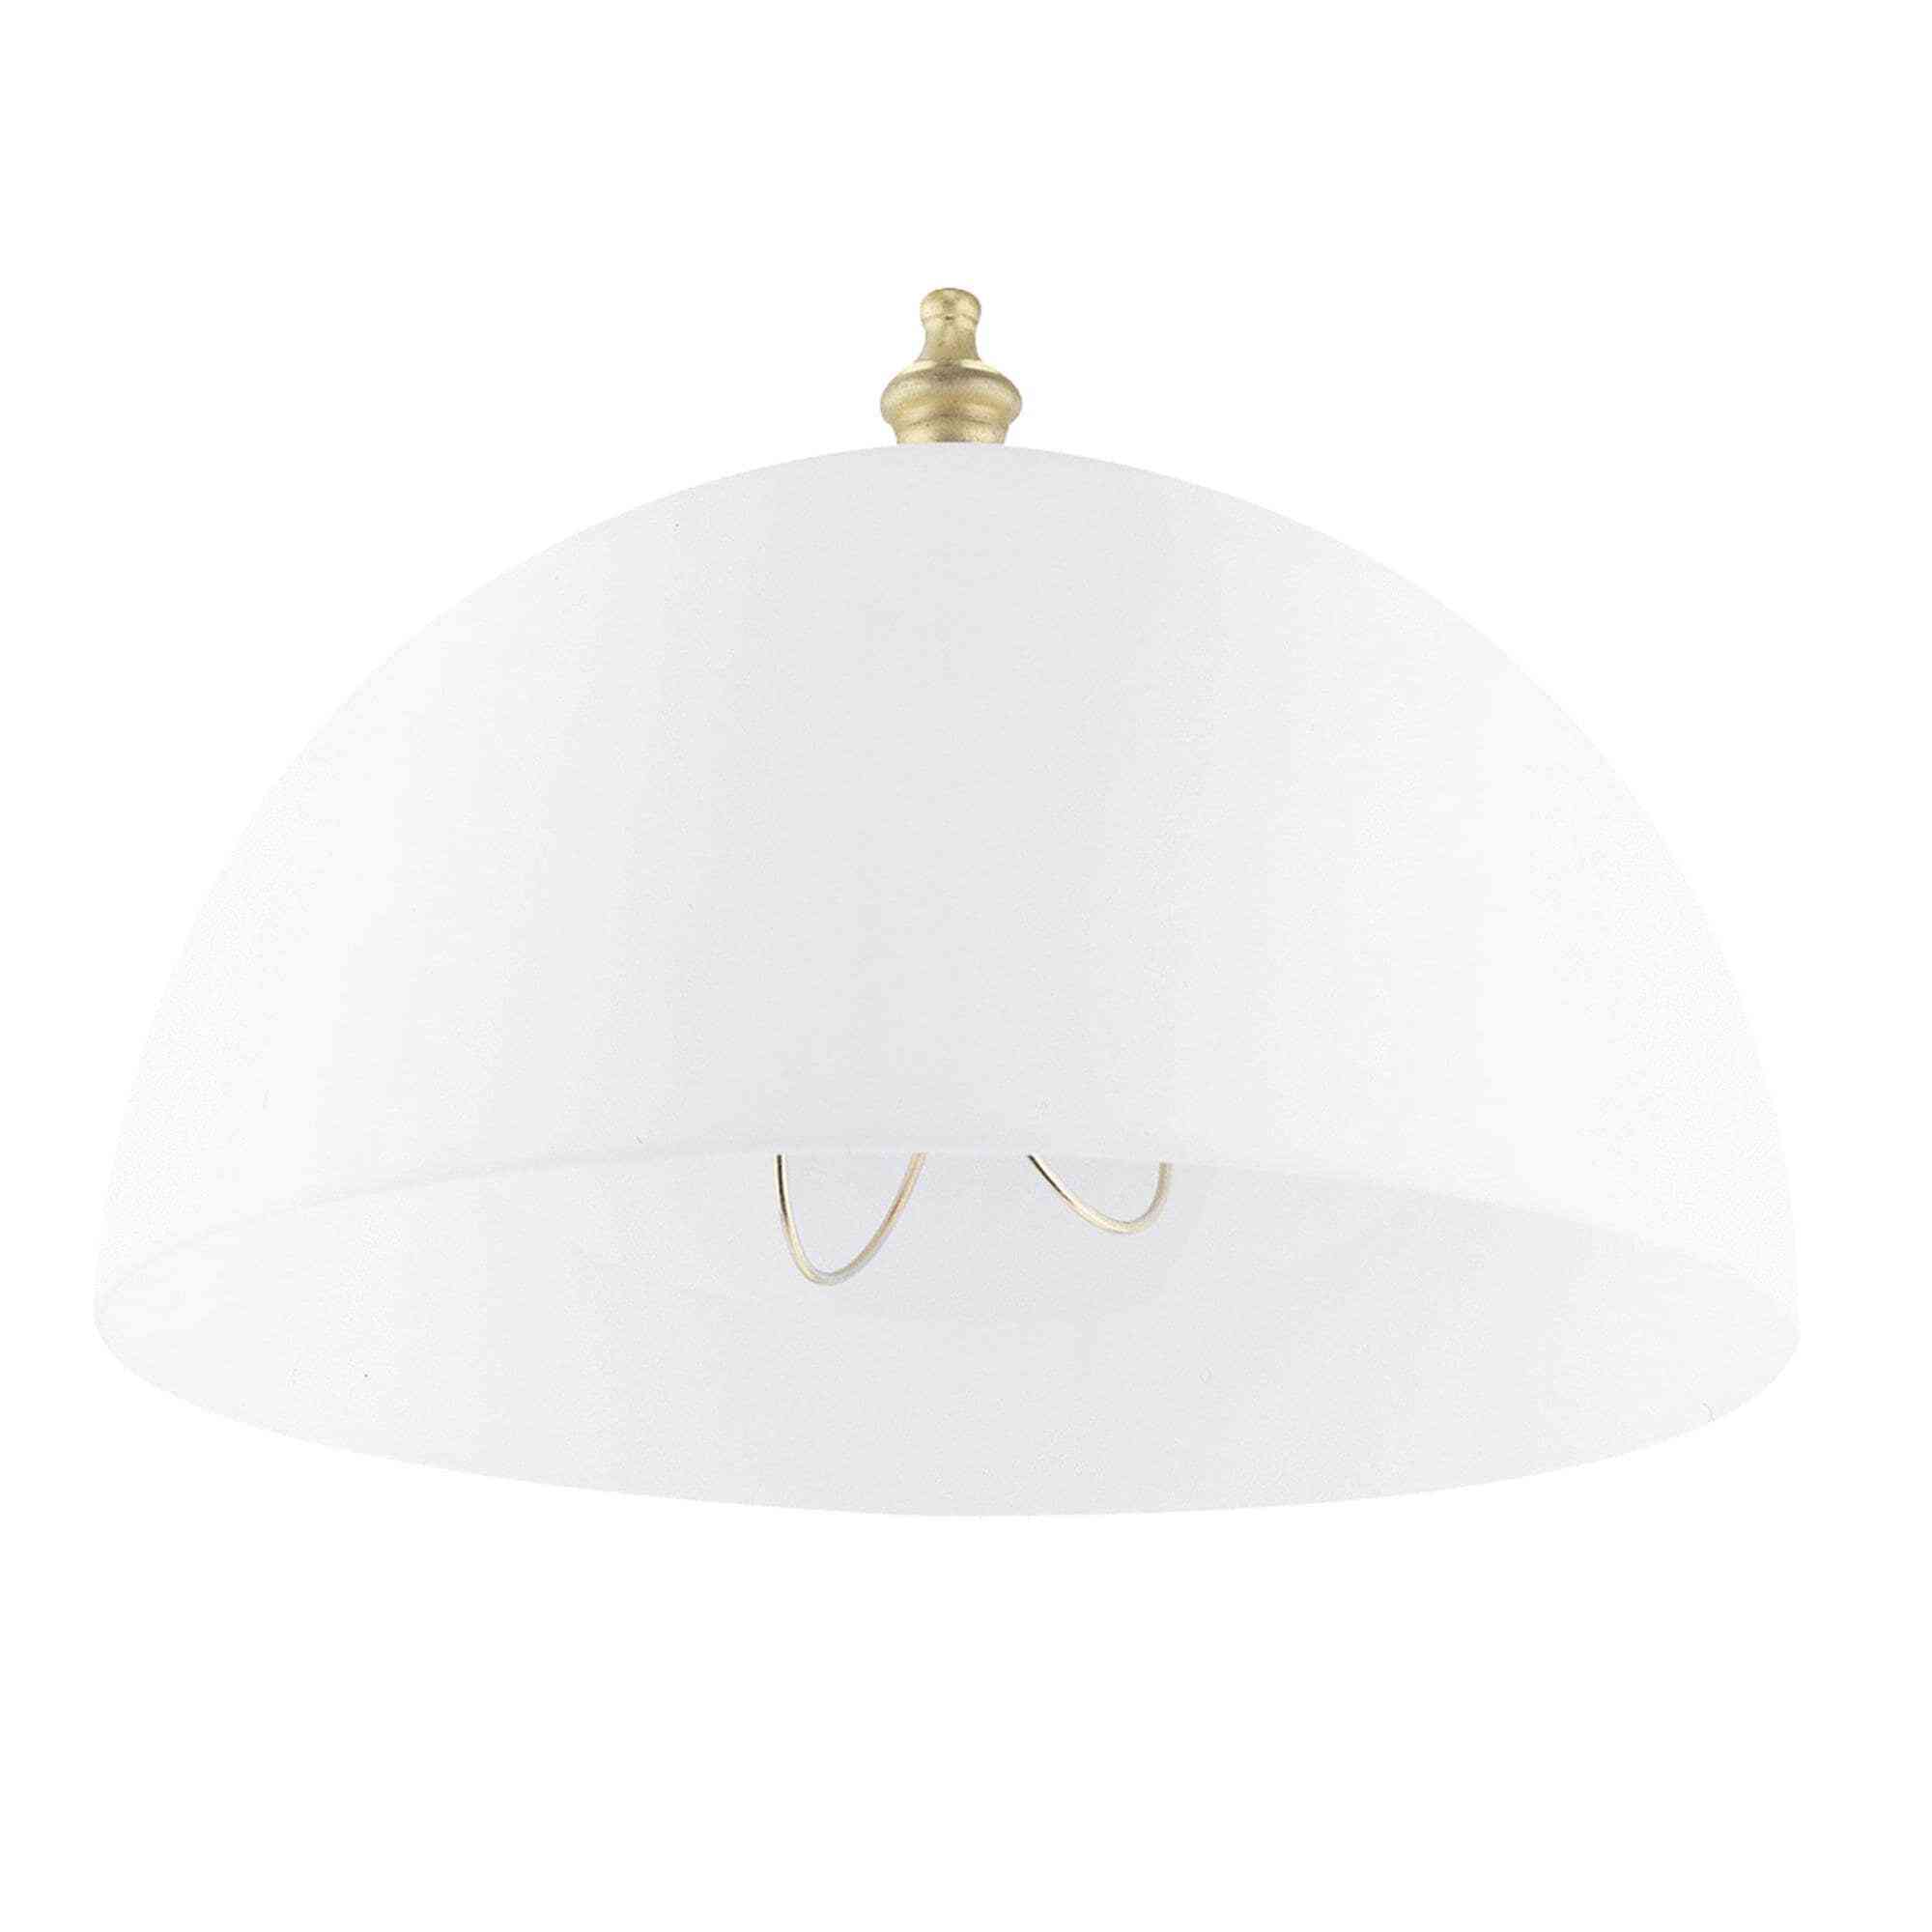 Clip on ceiling light shade in a streamlined but elegant design